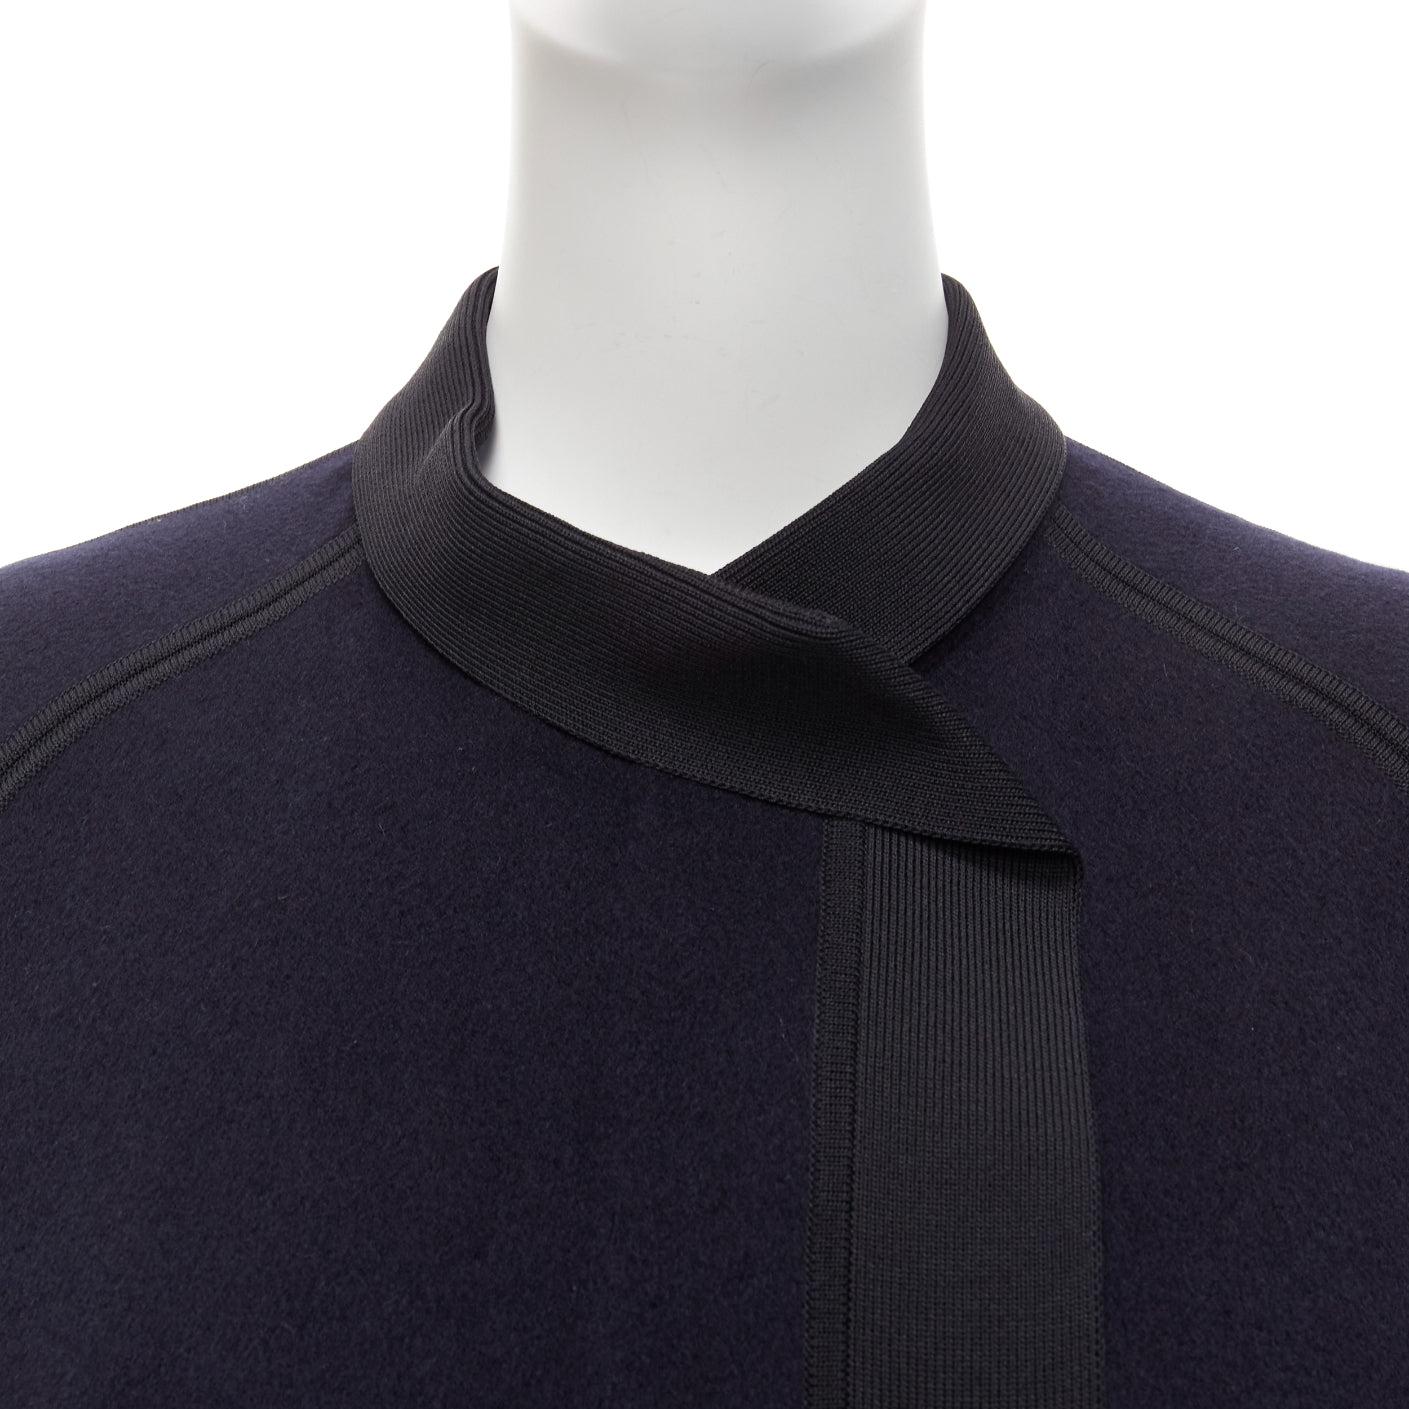 rare HERMES Martin Margiela navy double faced cashmere oversized cocoon coat FR42 XL
Reference: TGAS/D01012
Brand: Hermes
Designer: Martin Margiela
Material: Cashmere
Color: Navy
Pattern: Solid
Closure: Snap Buttons
Lining: Blue Cashmere
Made in: